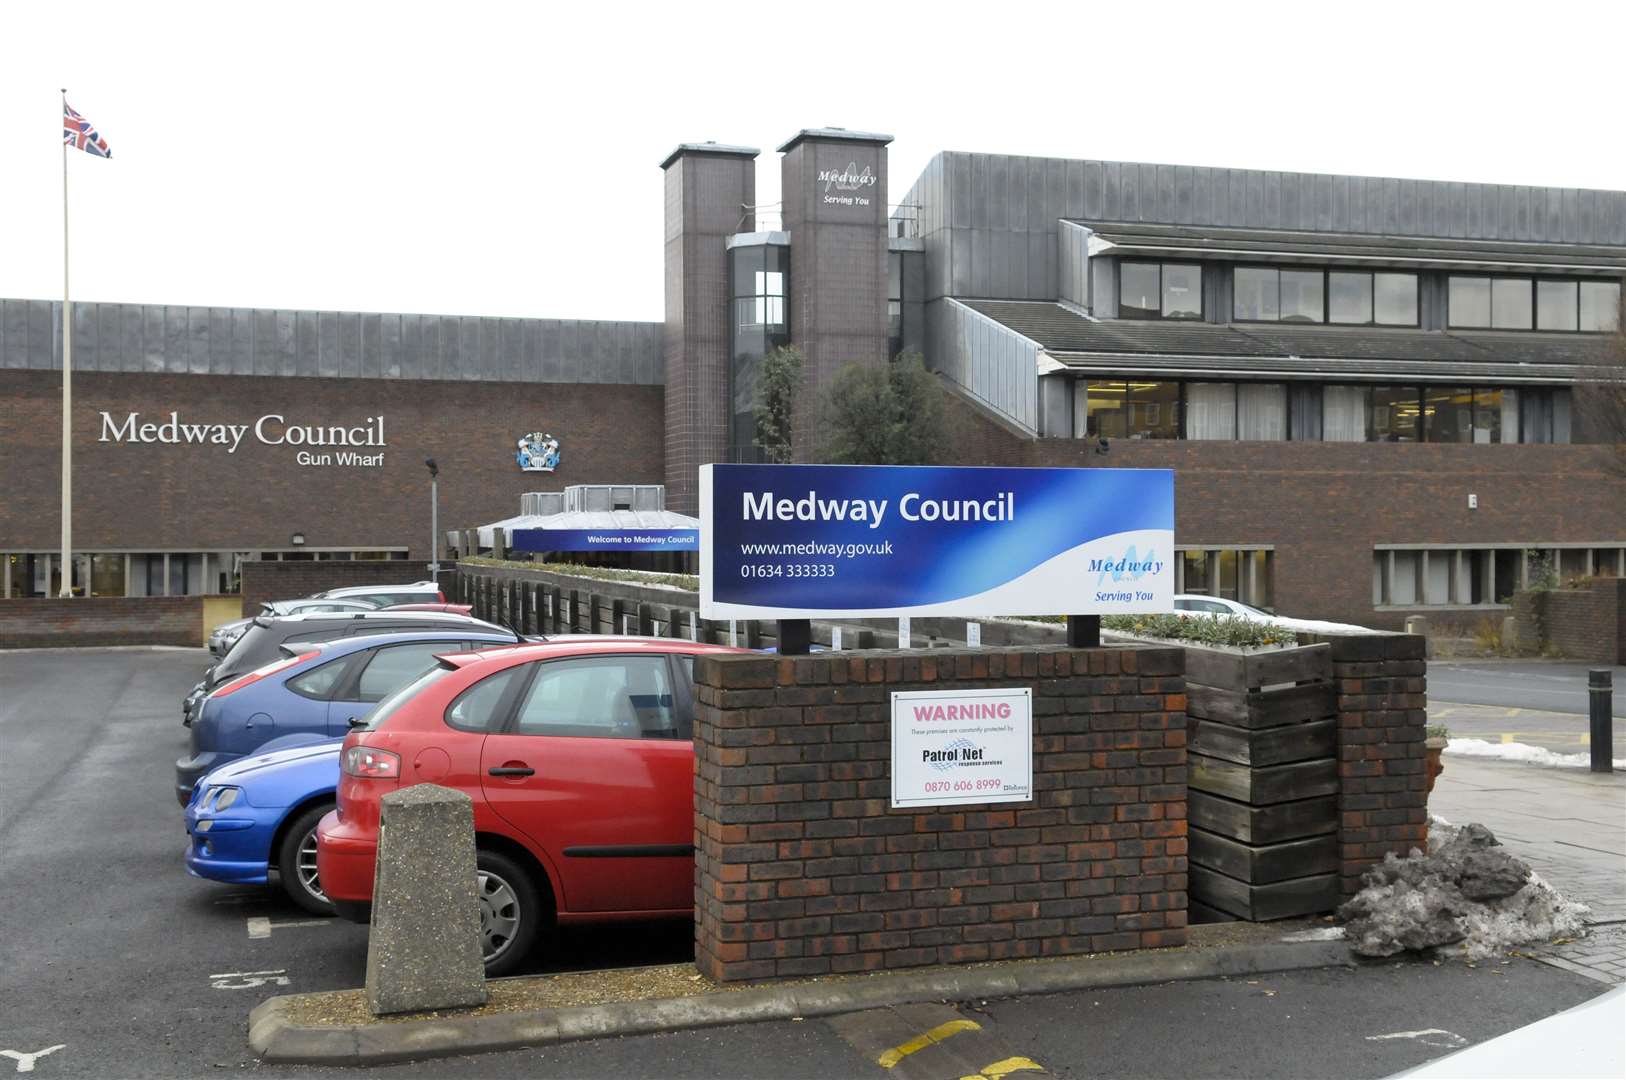 Medway Council's HQ